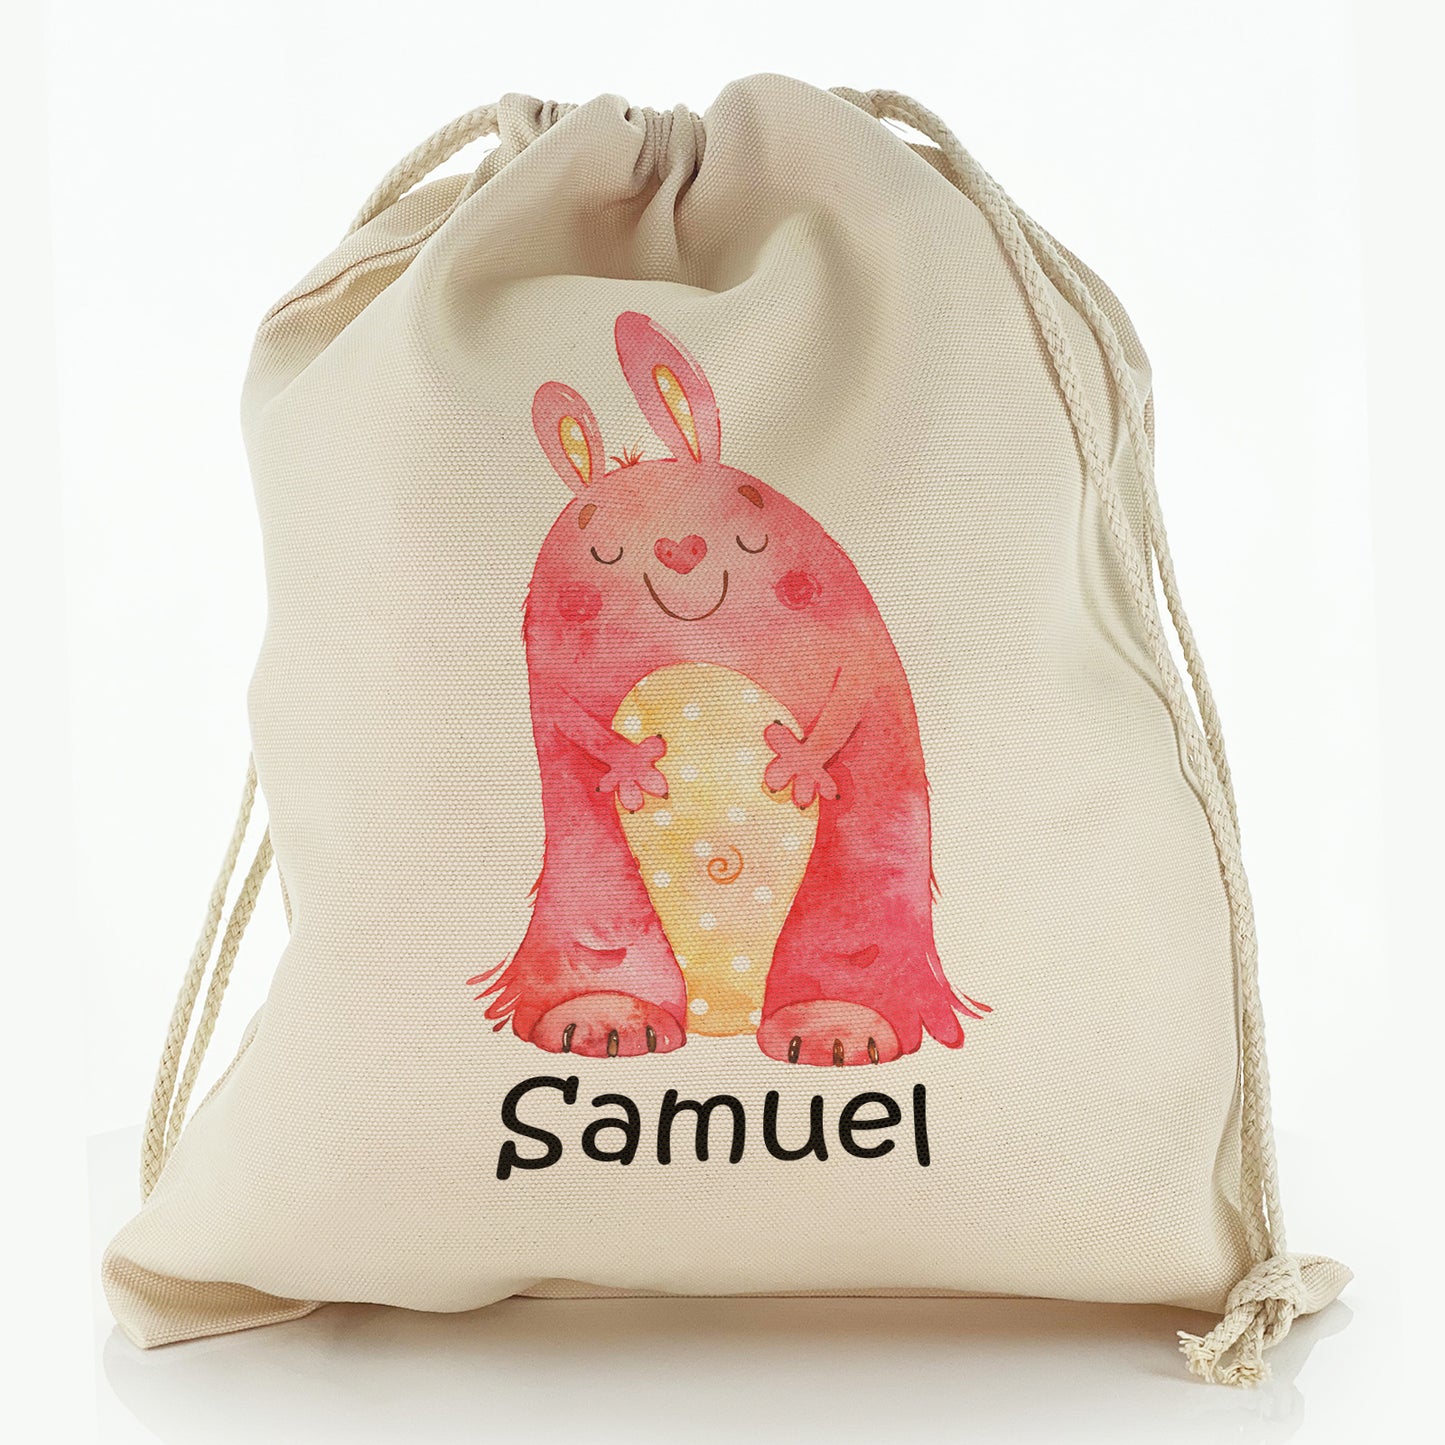 Personalised Canvas Sack with Childish Text and Red Rabbit Monster